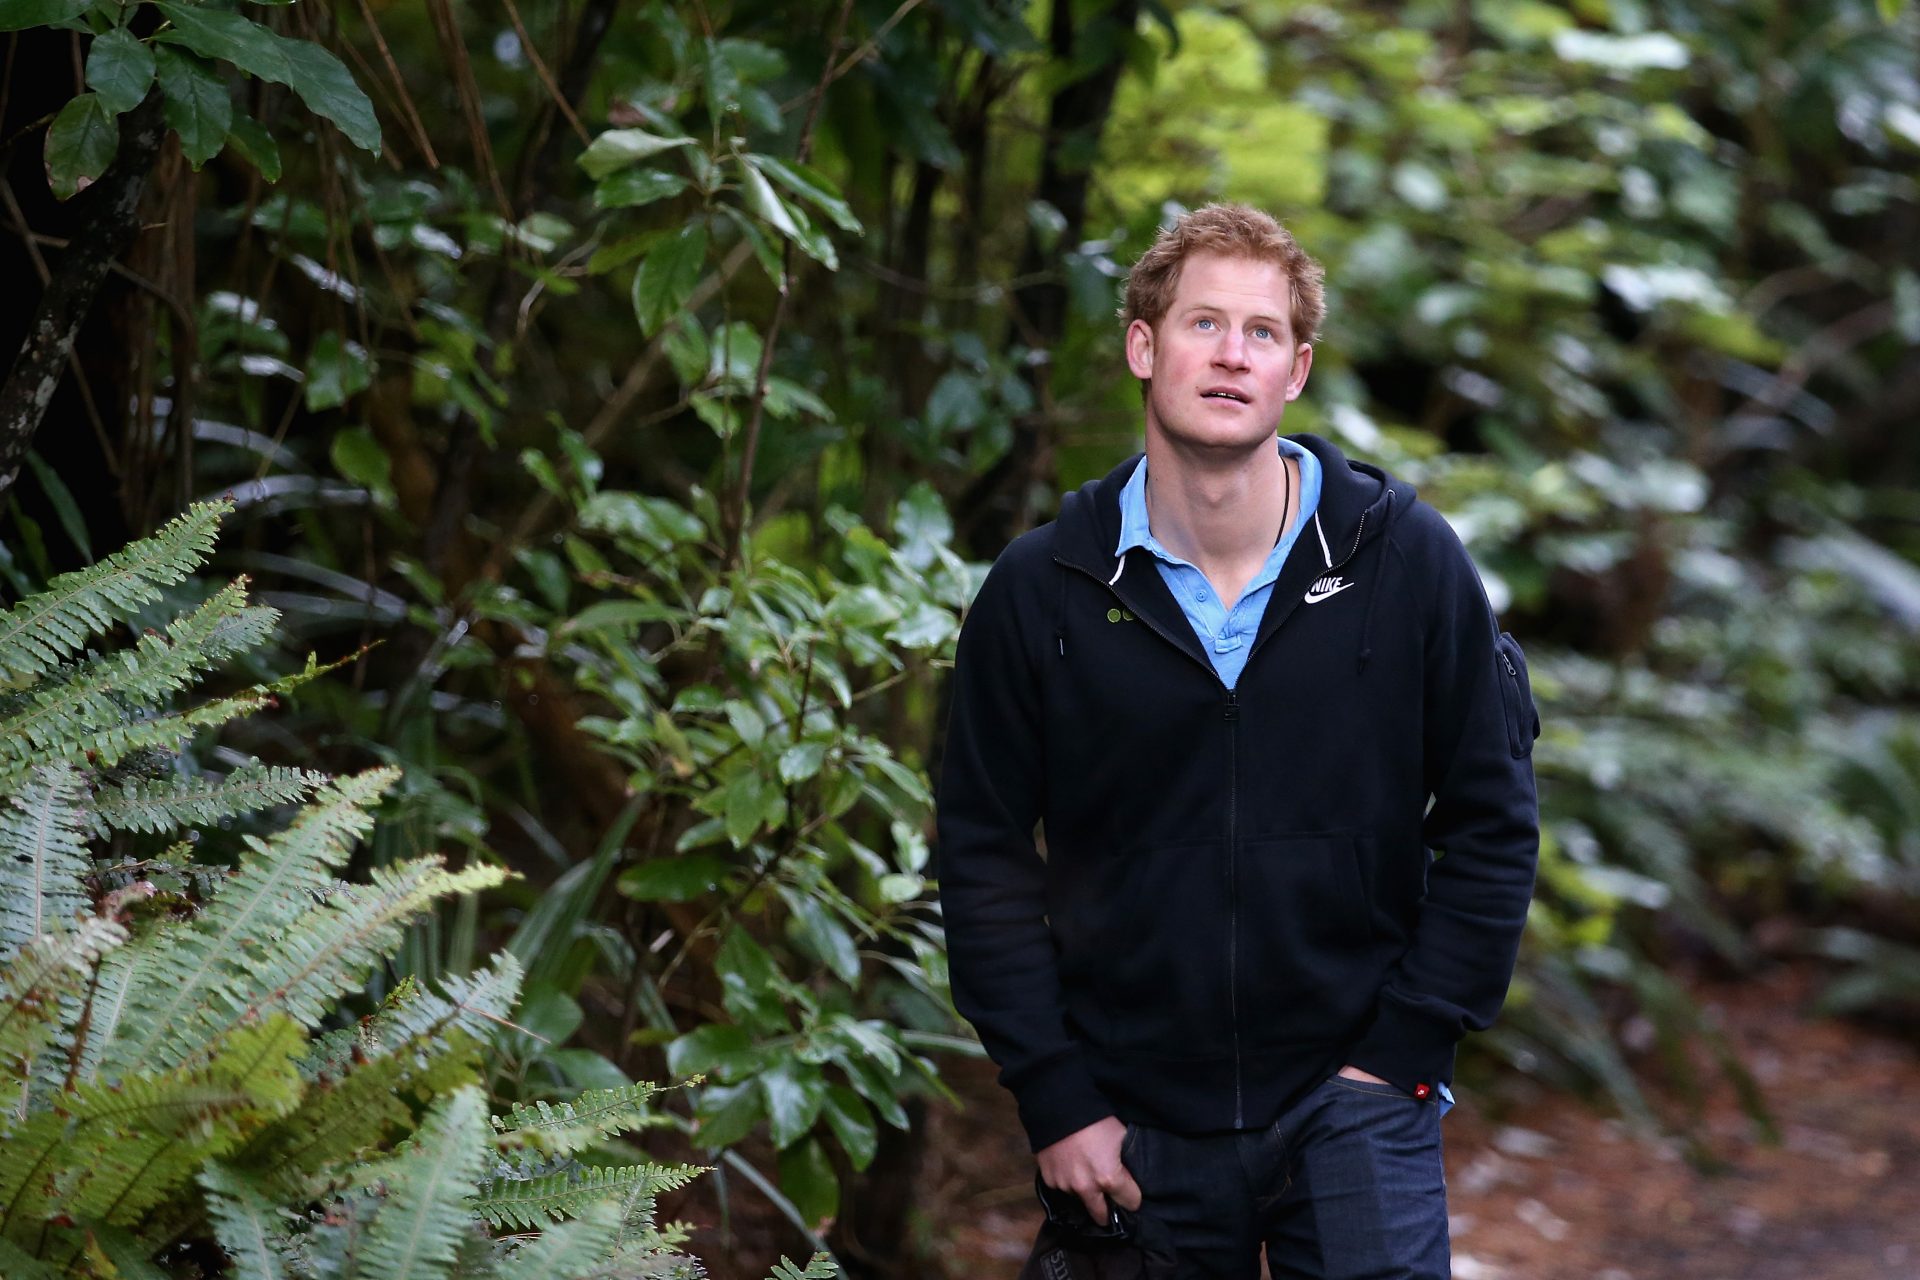 <p>That year, the prince visited New Zealand on his own. Here he's walking through a rainforest in the open wildlife sanctuary of Ulva Island</p>